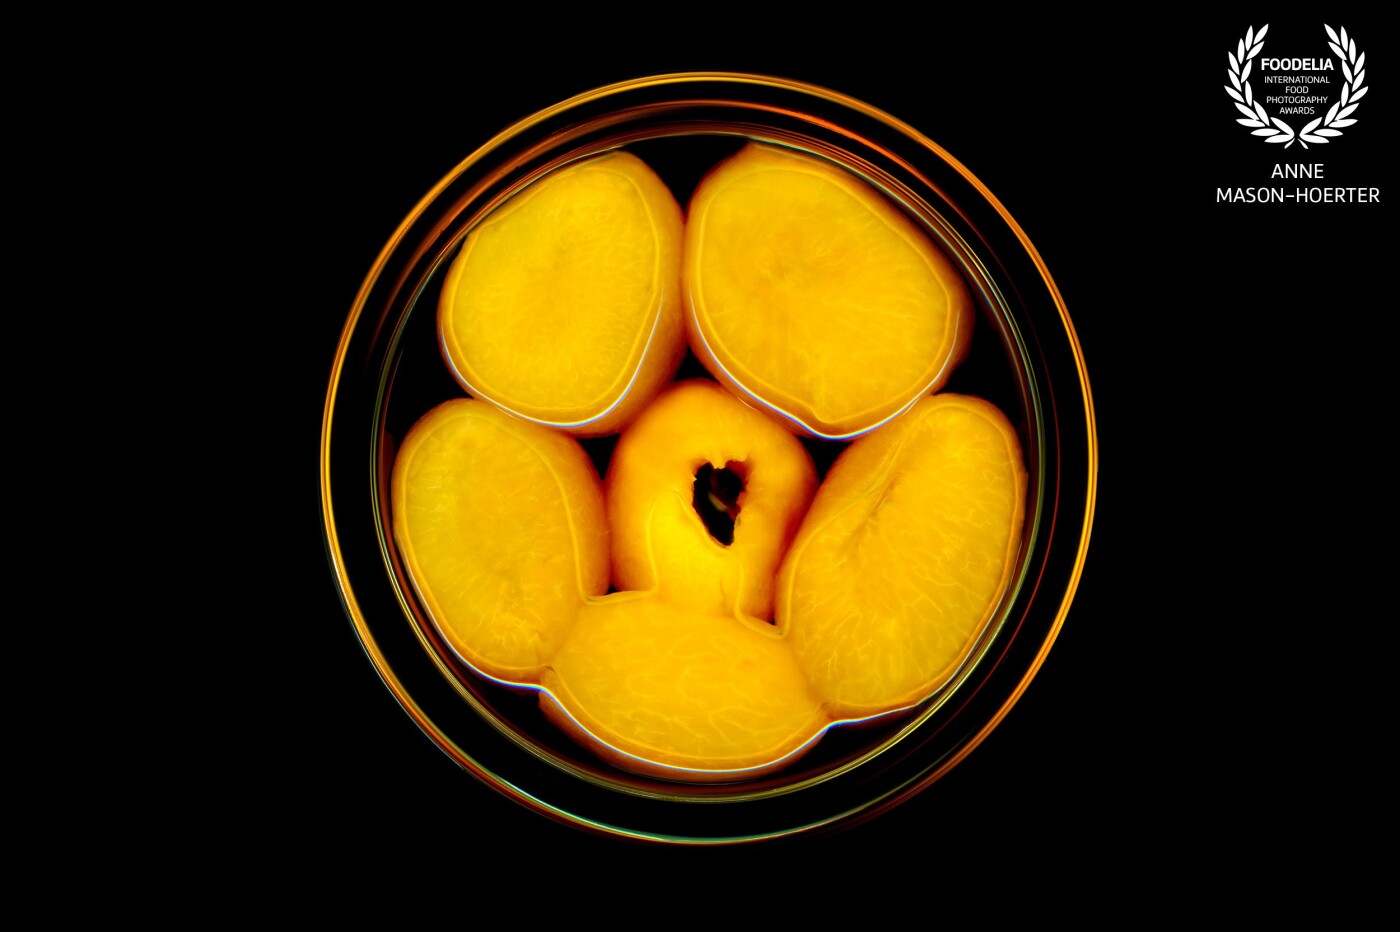 This image of canned Apricots in sugar is from my isolation series. I noticed on the first day of our countries quarantine, a surreal frenzy at the local supermarket for canned goods. I started to wonder if I had missed some important information on the news. This started a chain reaction in me and I too started to buy canned food. Once at home, I started to laugh, because I normally don't buy canned food but also became worried since I am alone. What if I got sick? Suddenly this array of canned food became very important to me. It gave me a funny form of security. All my images in this series are a combination of both multiple scanned imageries and camera data.  Some final images contain over 50 single images. My aim is to create images that display the uniqueness of each canned food item.